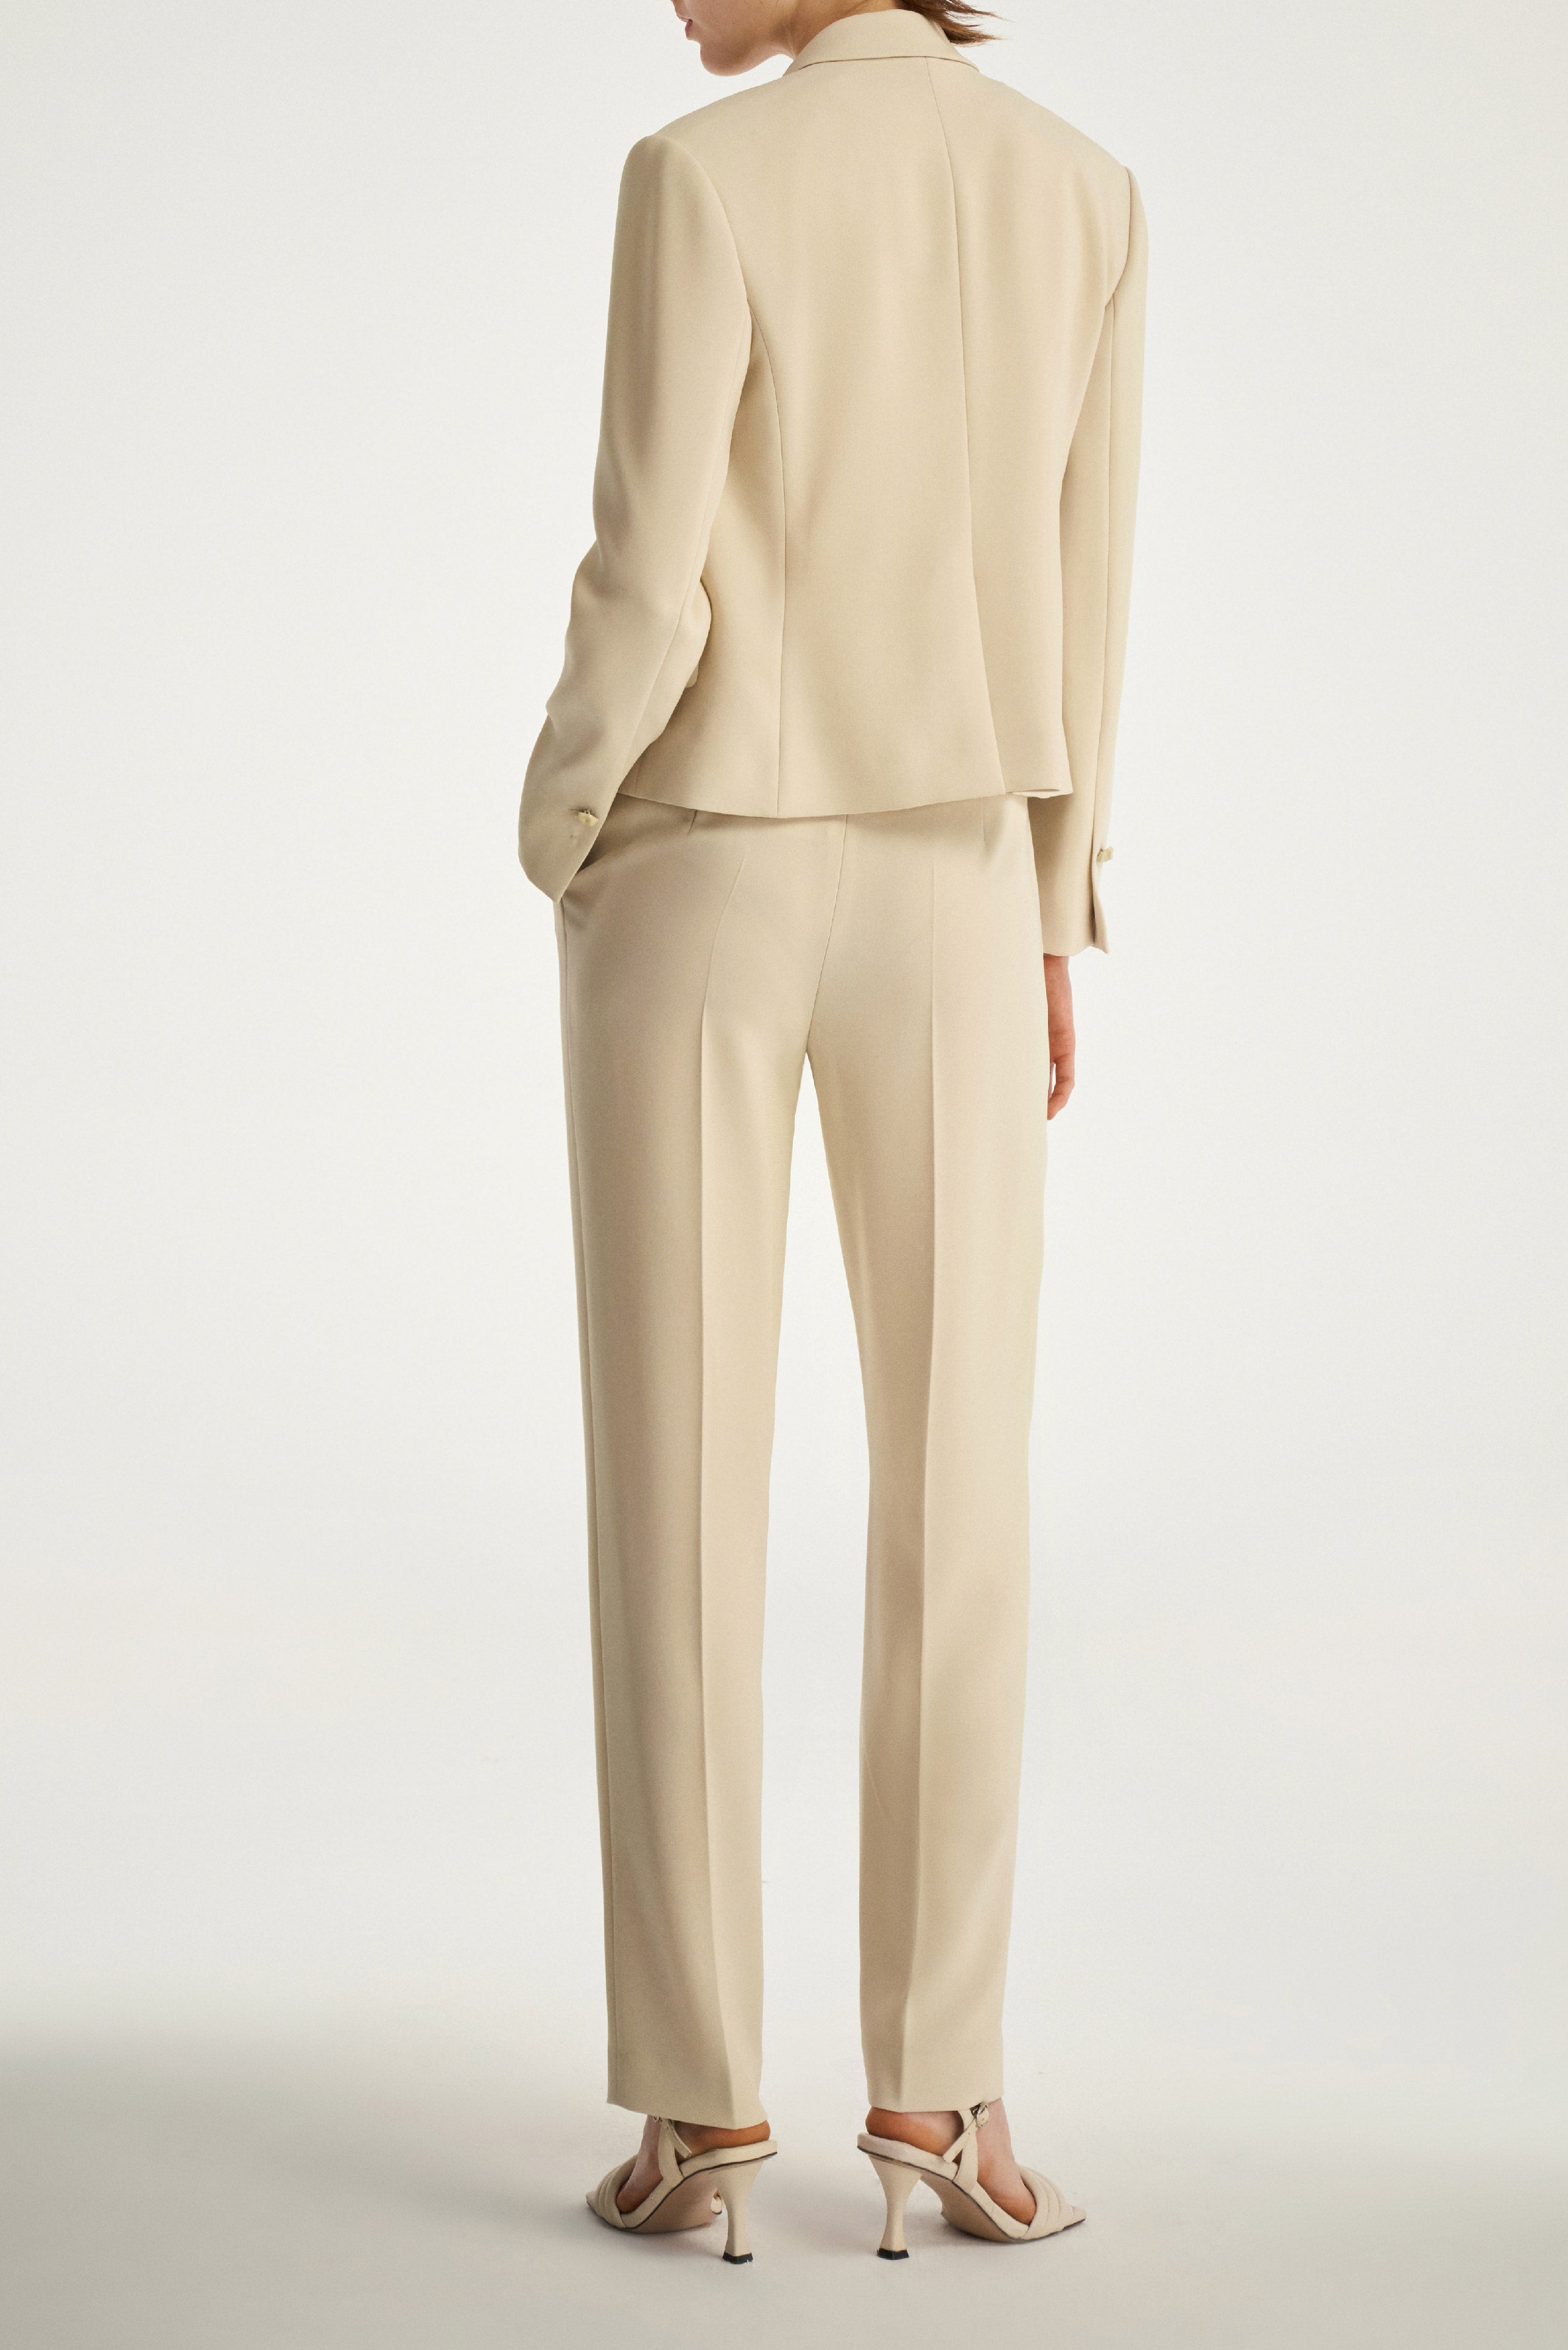 Laurèl Short-Length Blazer With A Double-Layered Collar